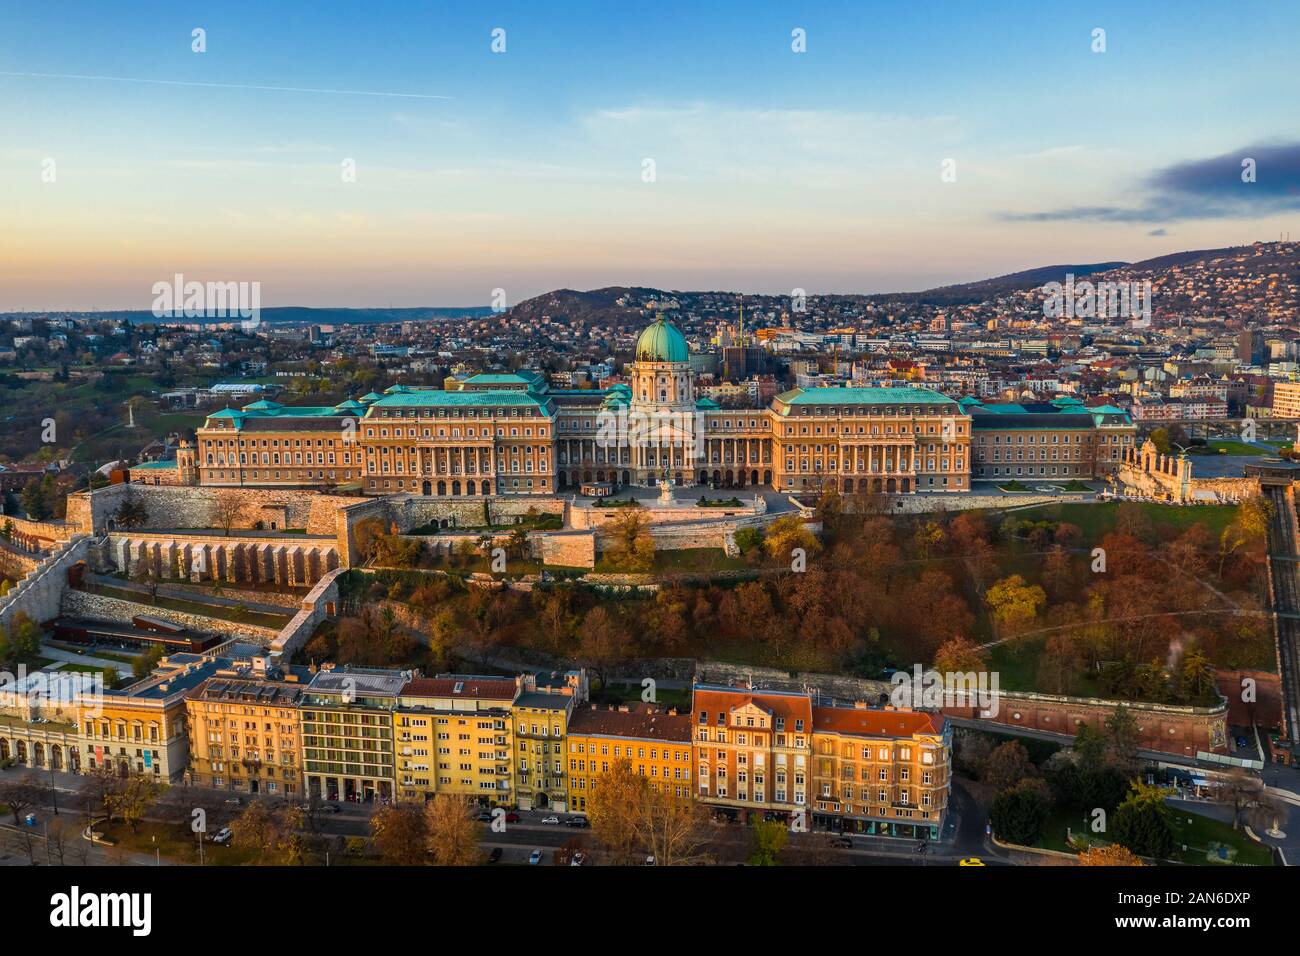 Budapest, Hungary - Aerial drone view of the famous Buda Castle Royal Palace at sunrise on a calm autumn morning Stock Photo